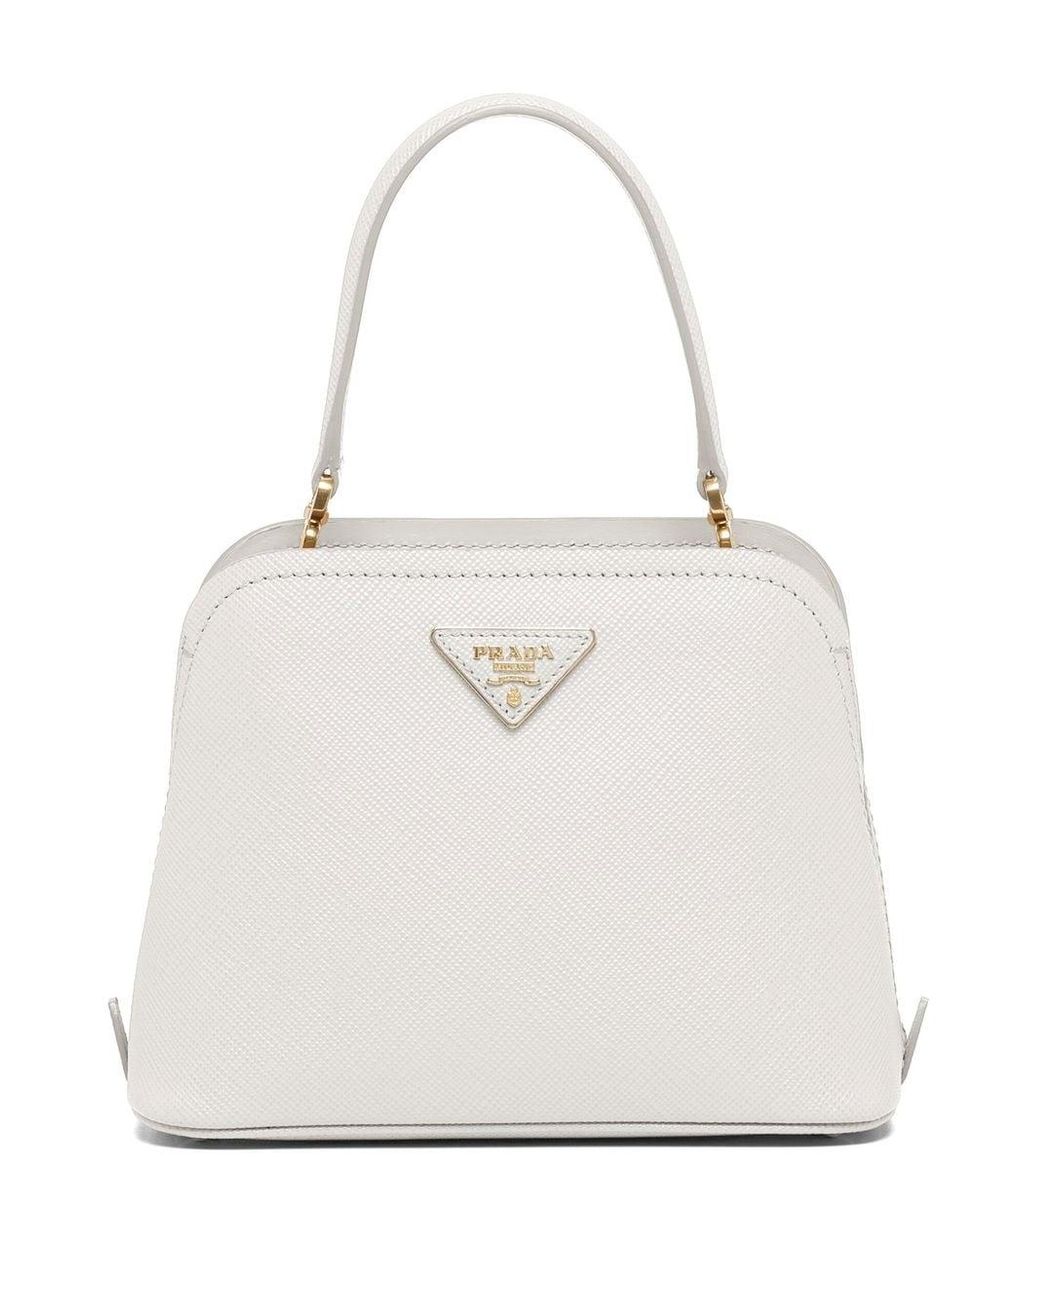 Prada Small Matinée Saffiano Leather Tote Bag in White | Lyst